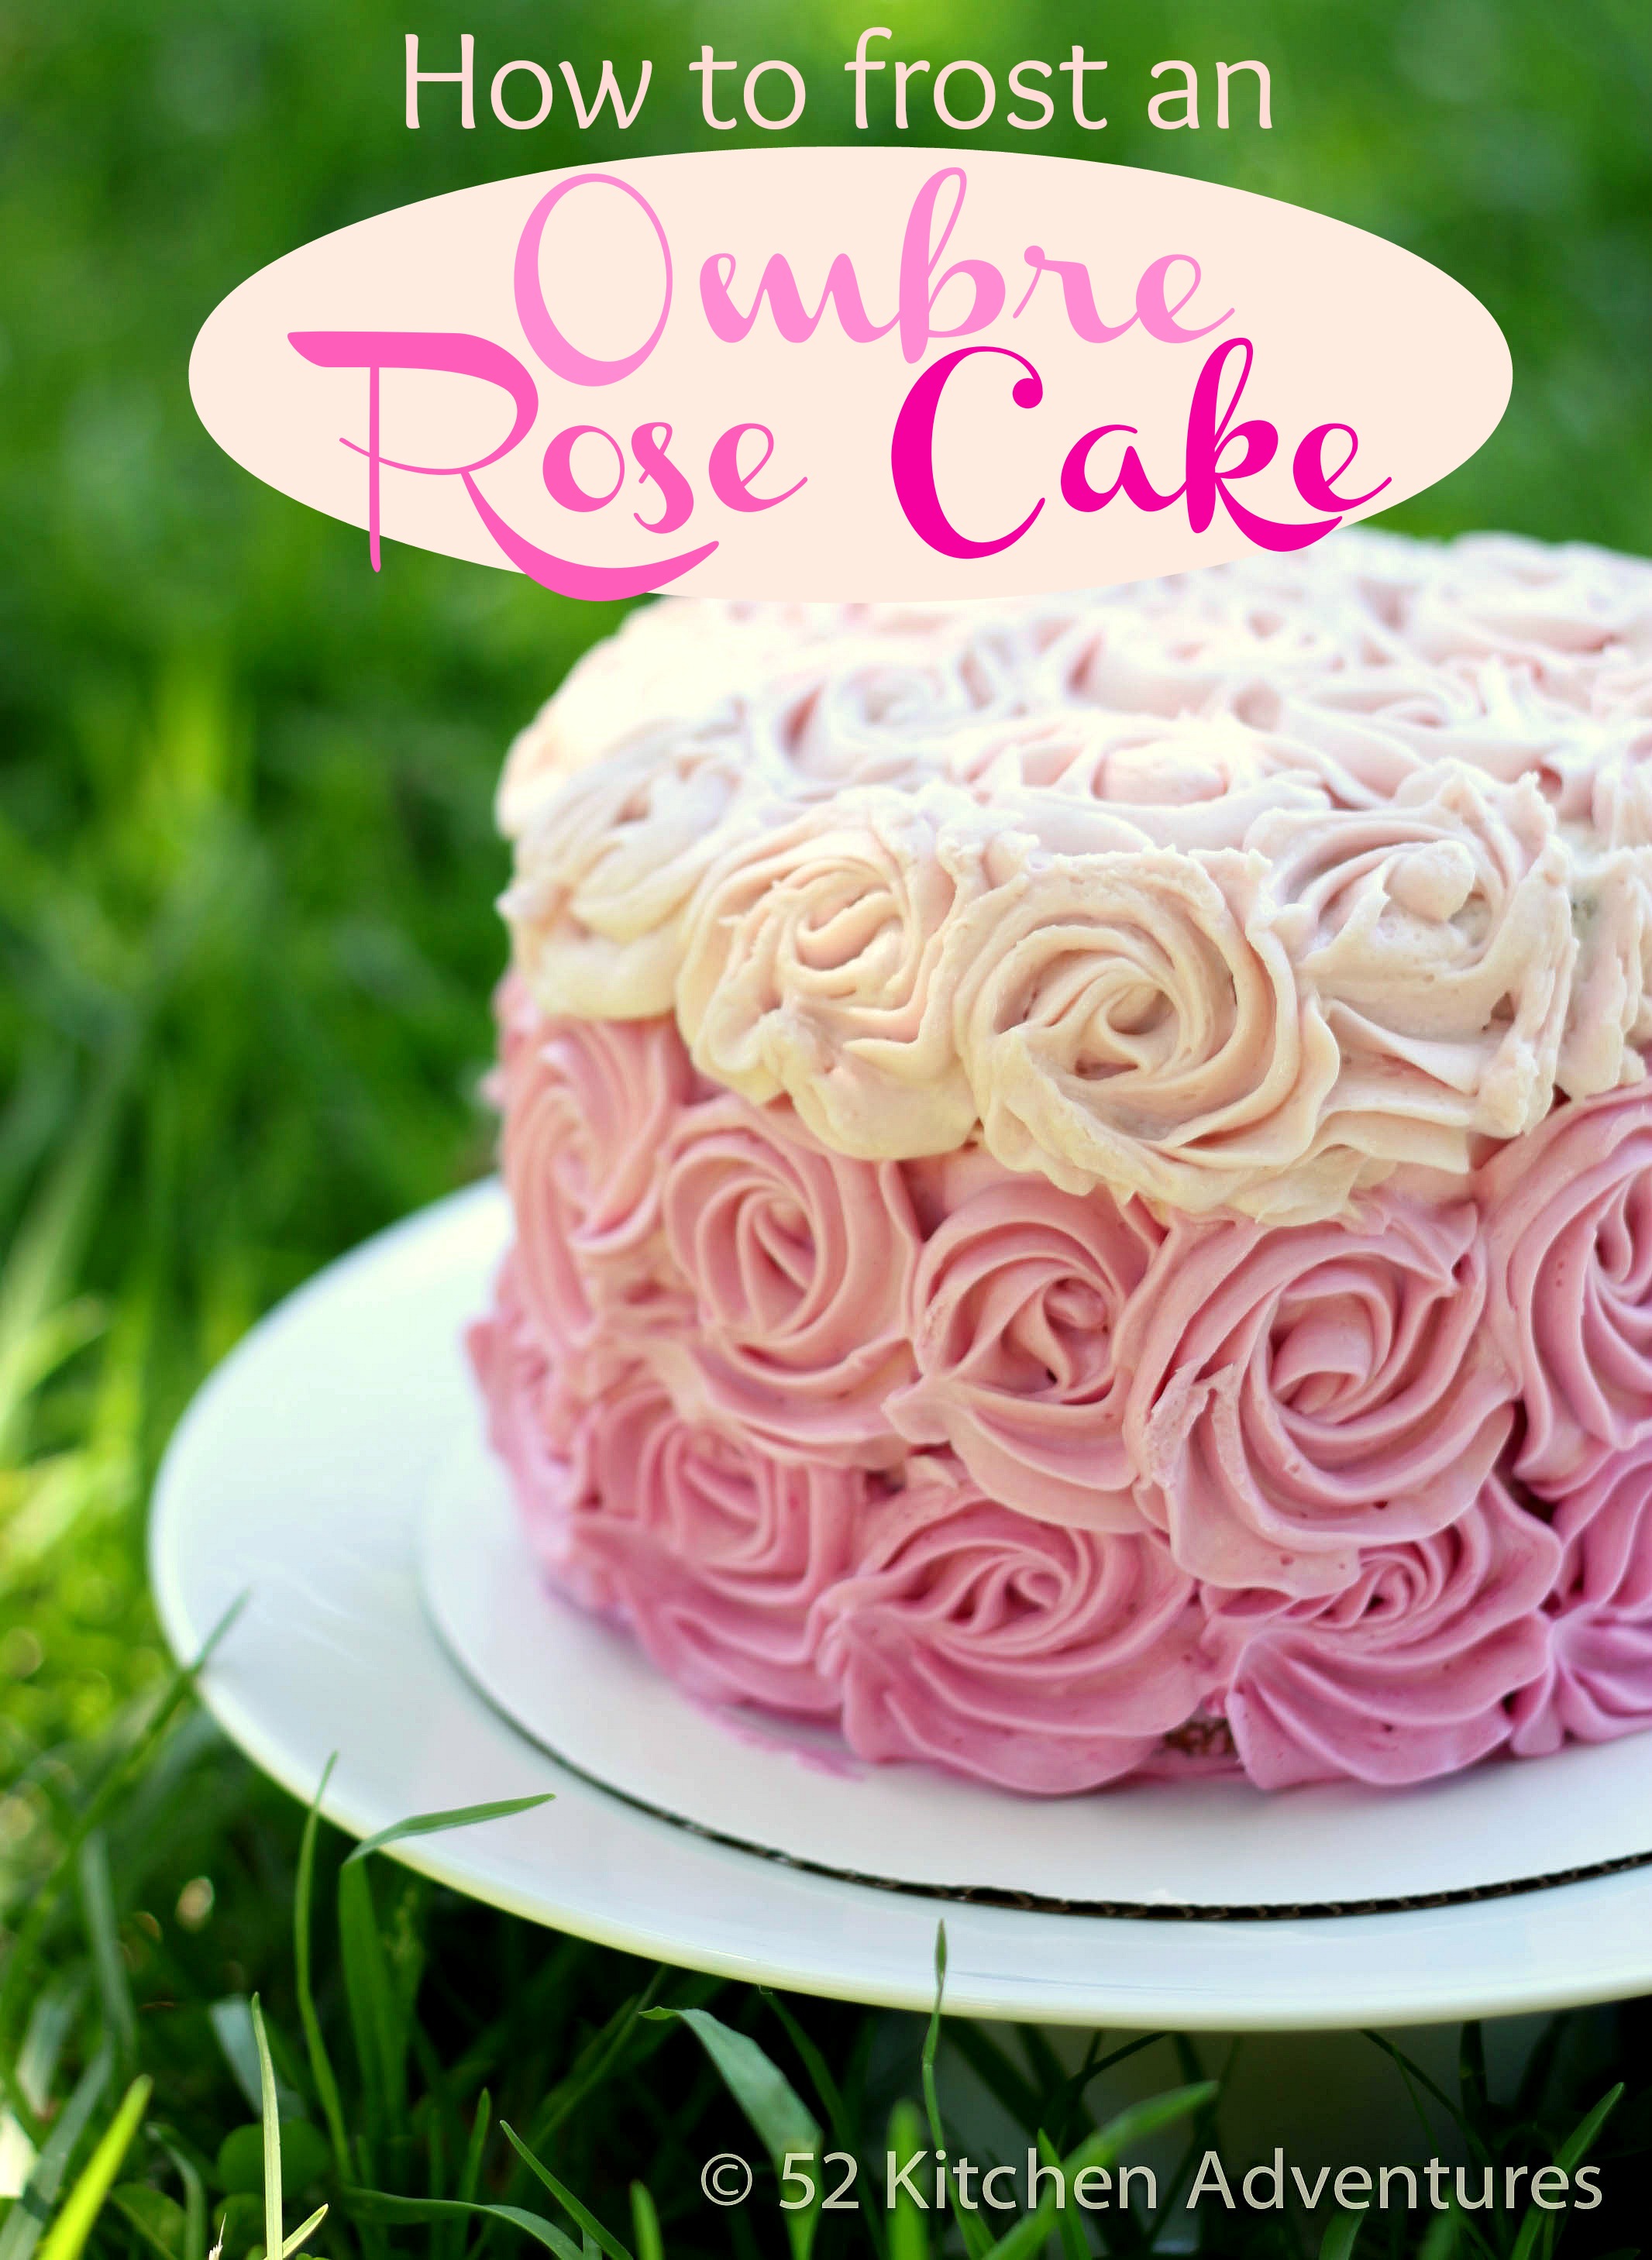 How to frost an ombre rose cake